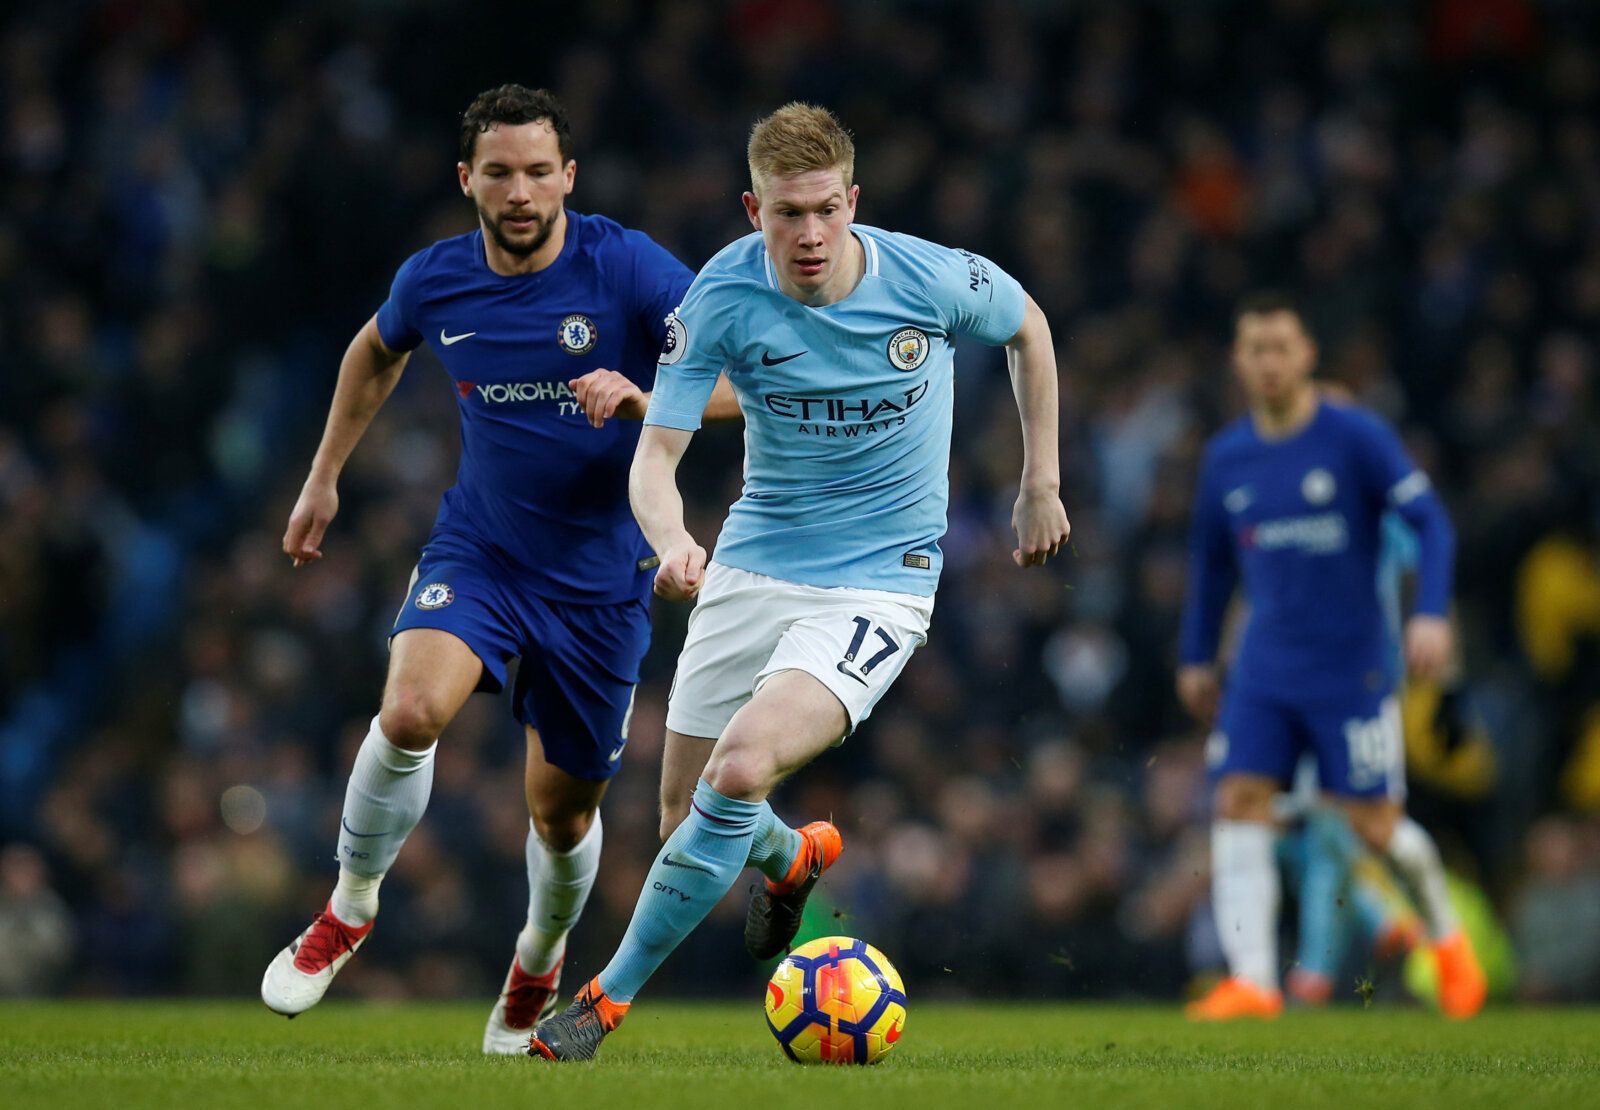 Soccer Football - Premier League - Manchester City vs Chelsea - Etihad Stadium, Manchester, Britain - March 4, 2018   Manchester City's Kevin De Bruyne in action with Chelsea’s Danny Drinkwater    REUTERS/Andrew Yates    EDITORIAL USE ONLY. No use with unauthorized audio, video, data, fixture lists, club/league logos or 